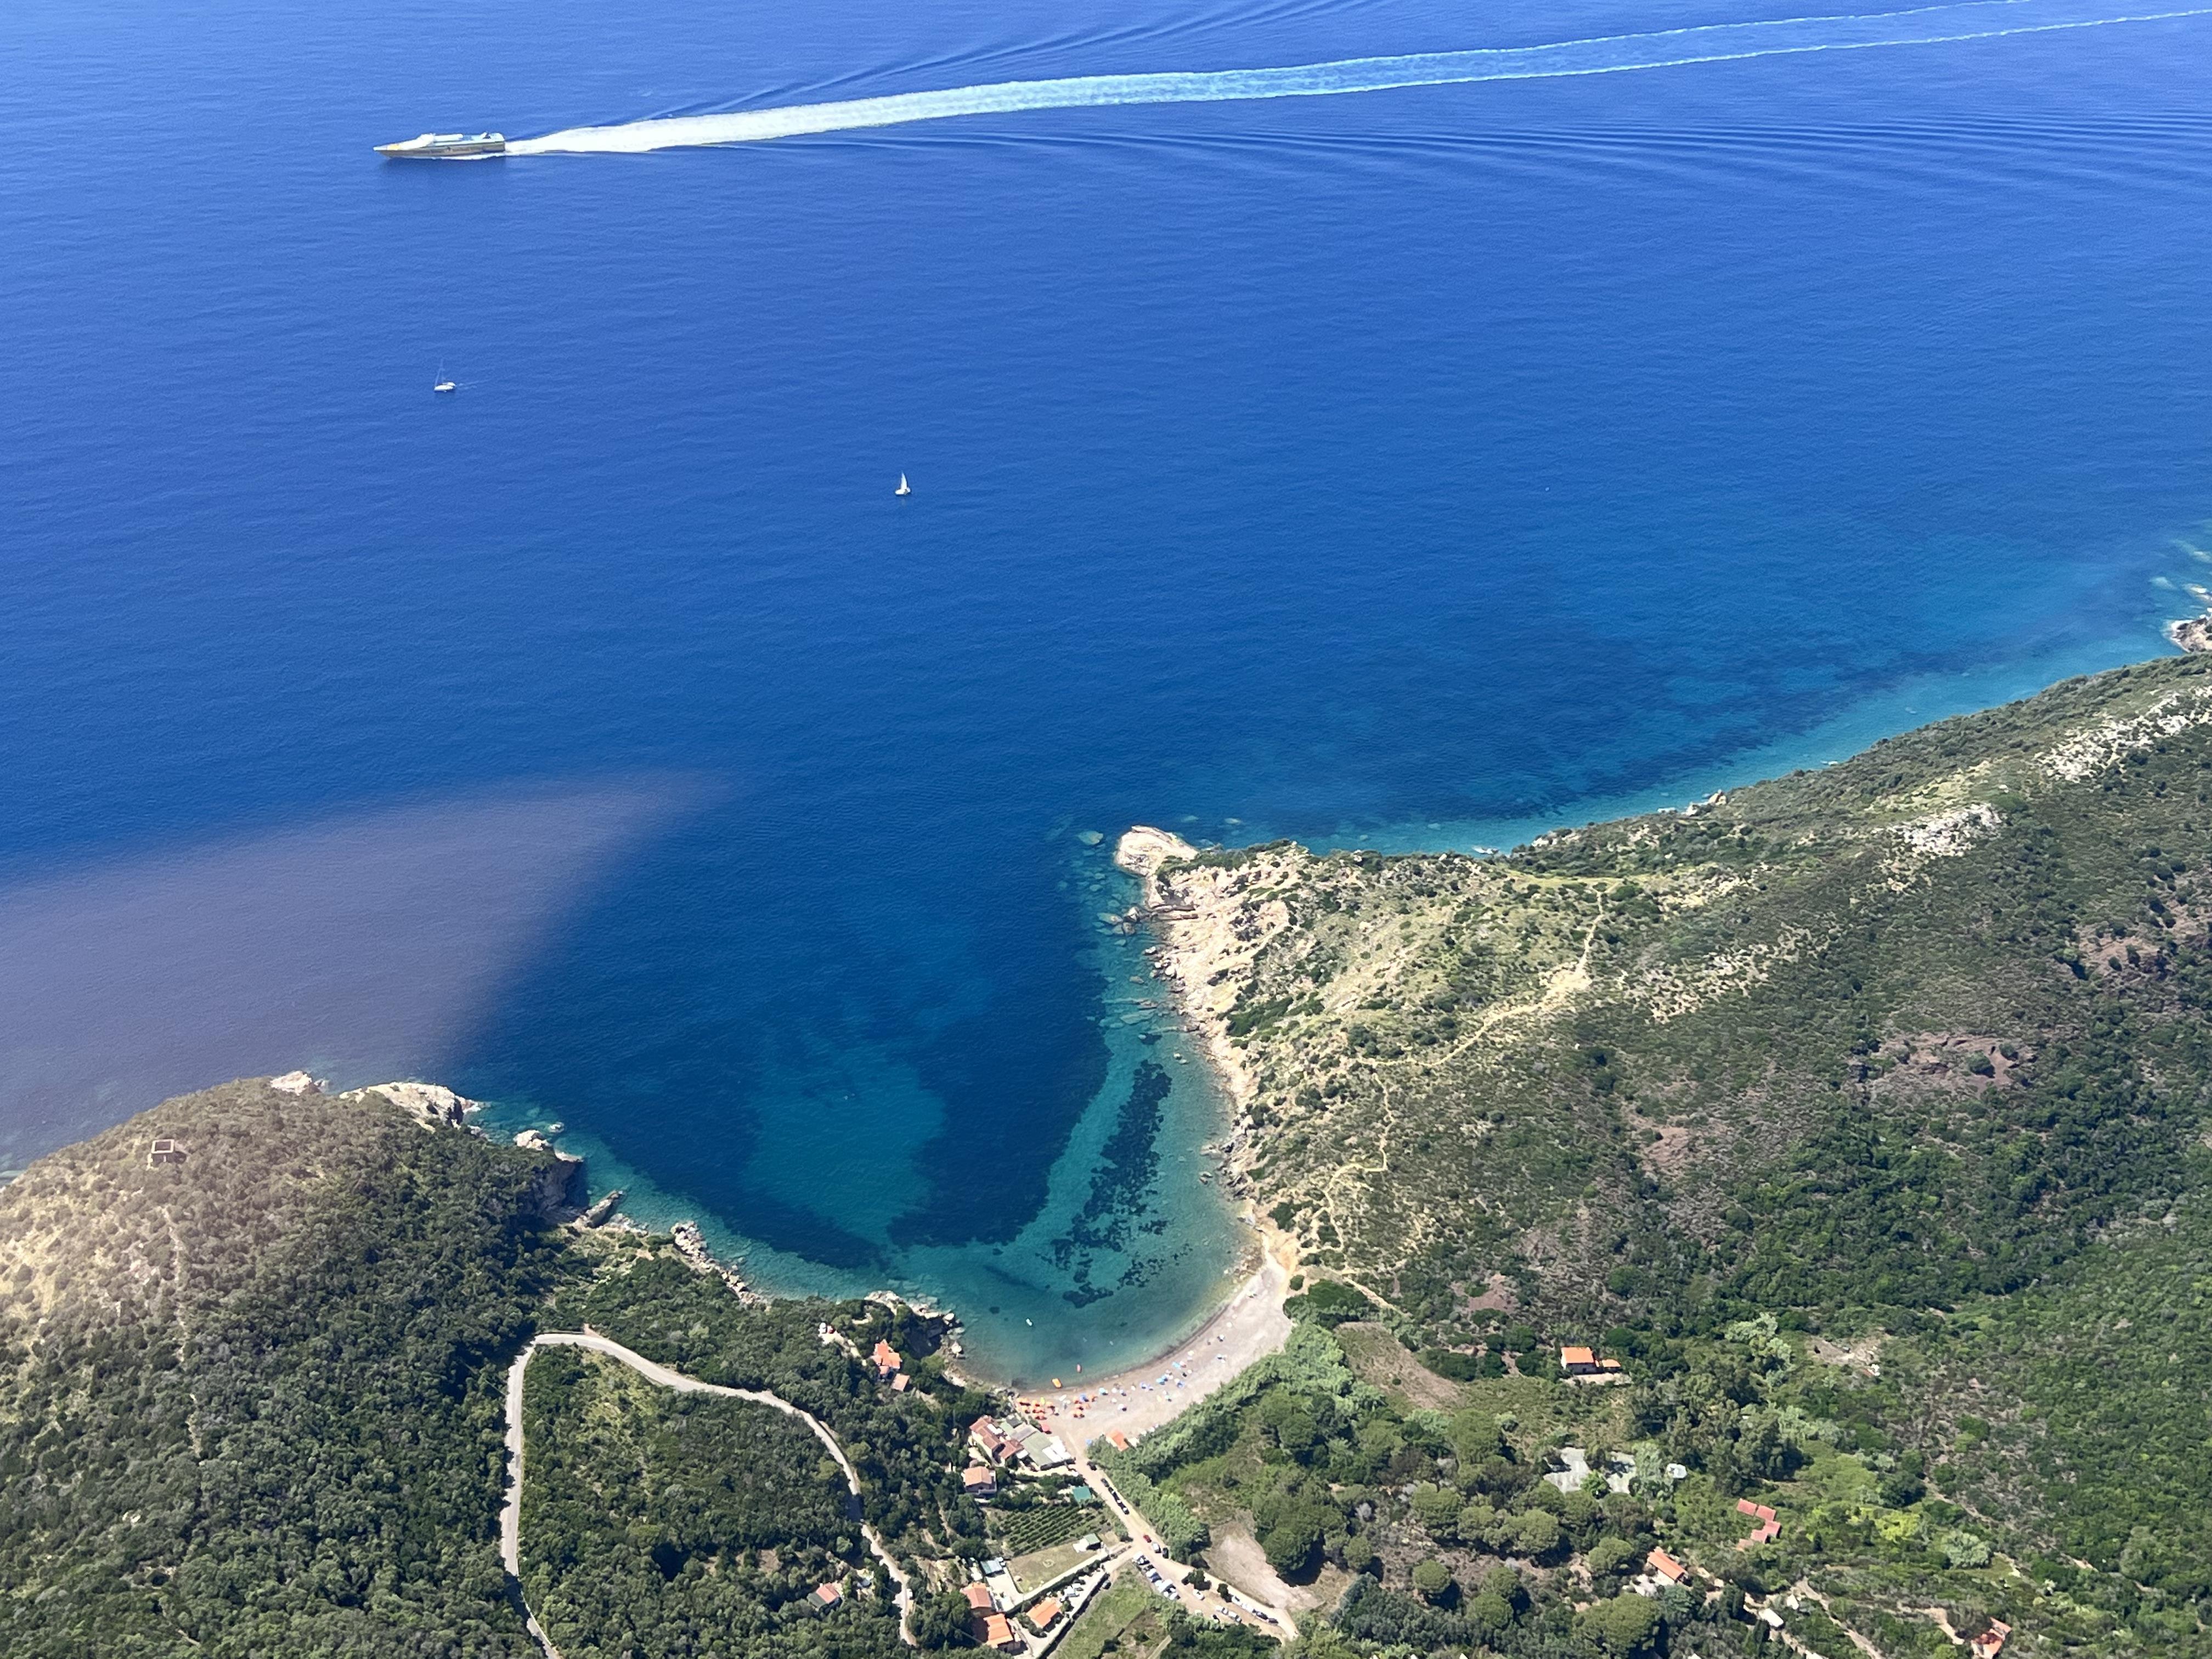 Sky Elba: Helicopter day tour between Tuscany and the Elba Island